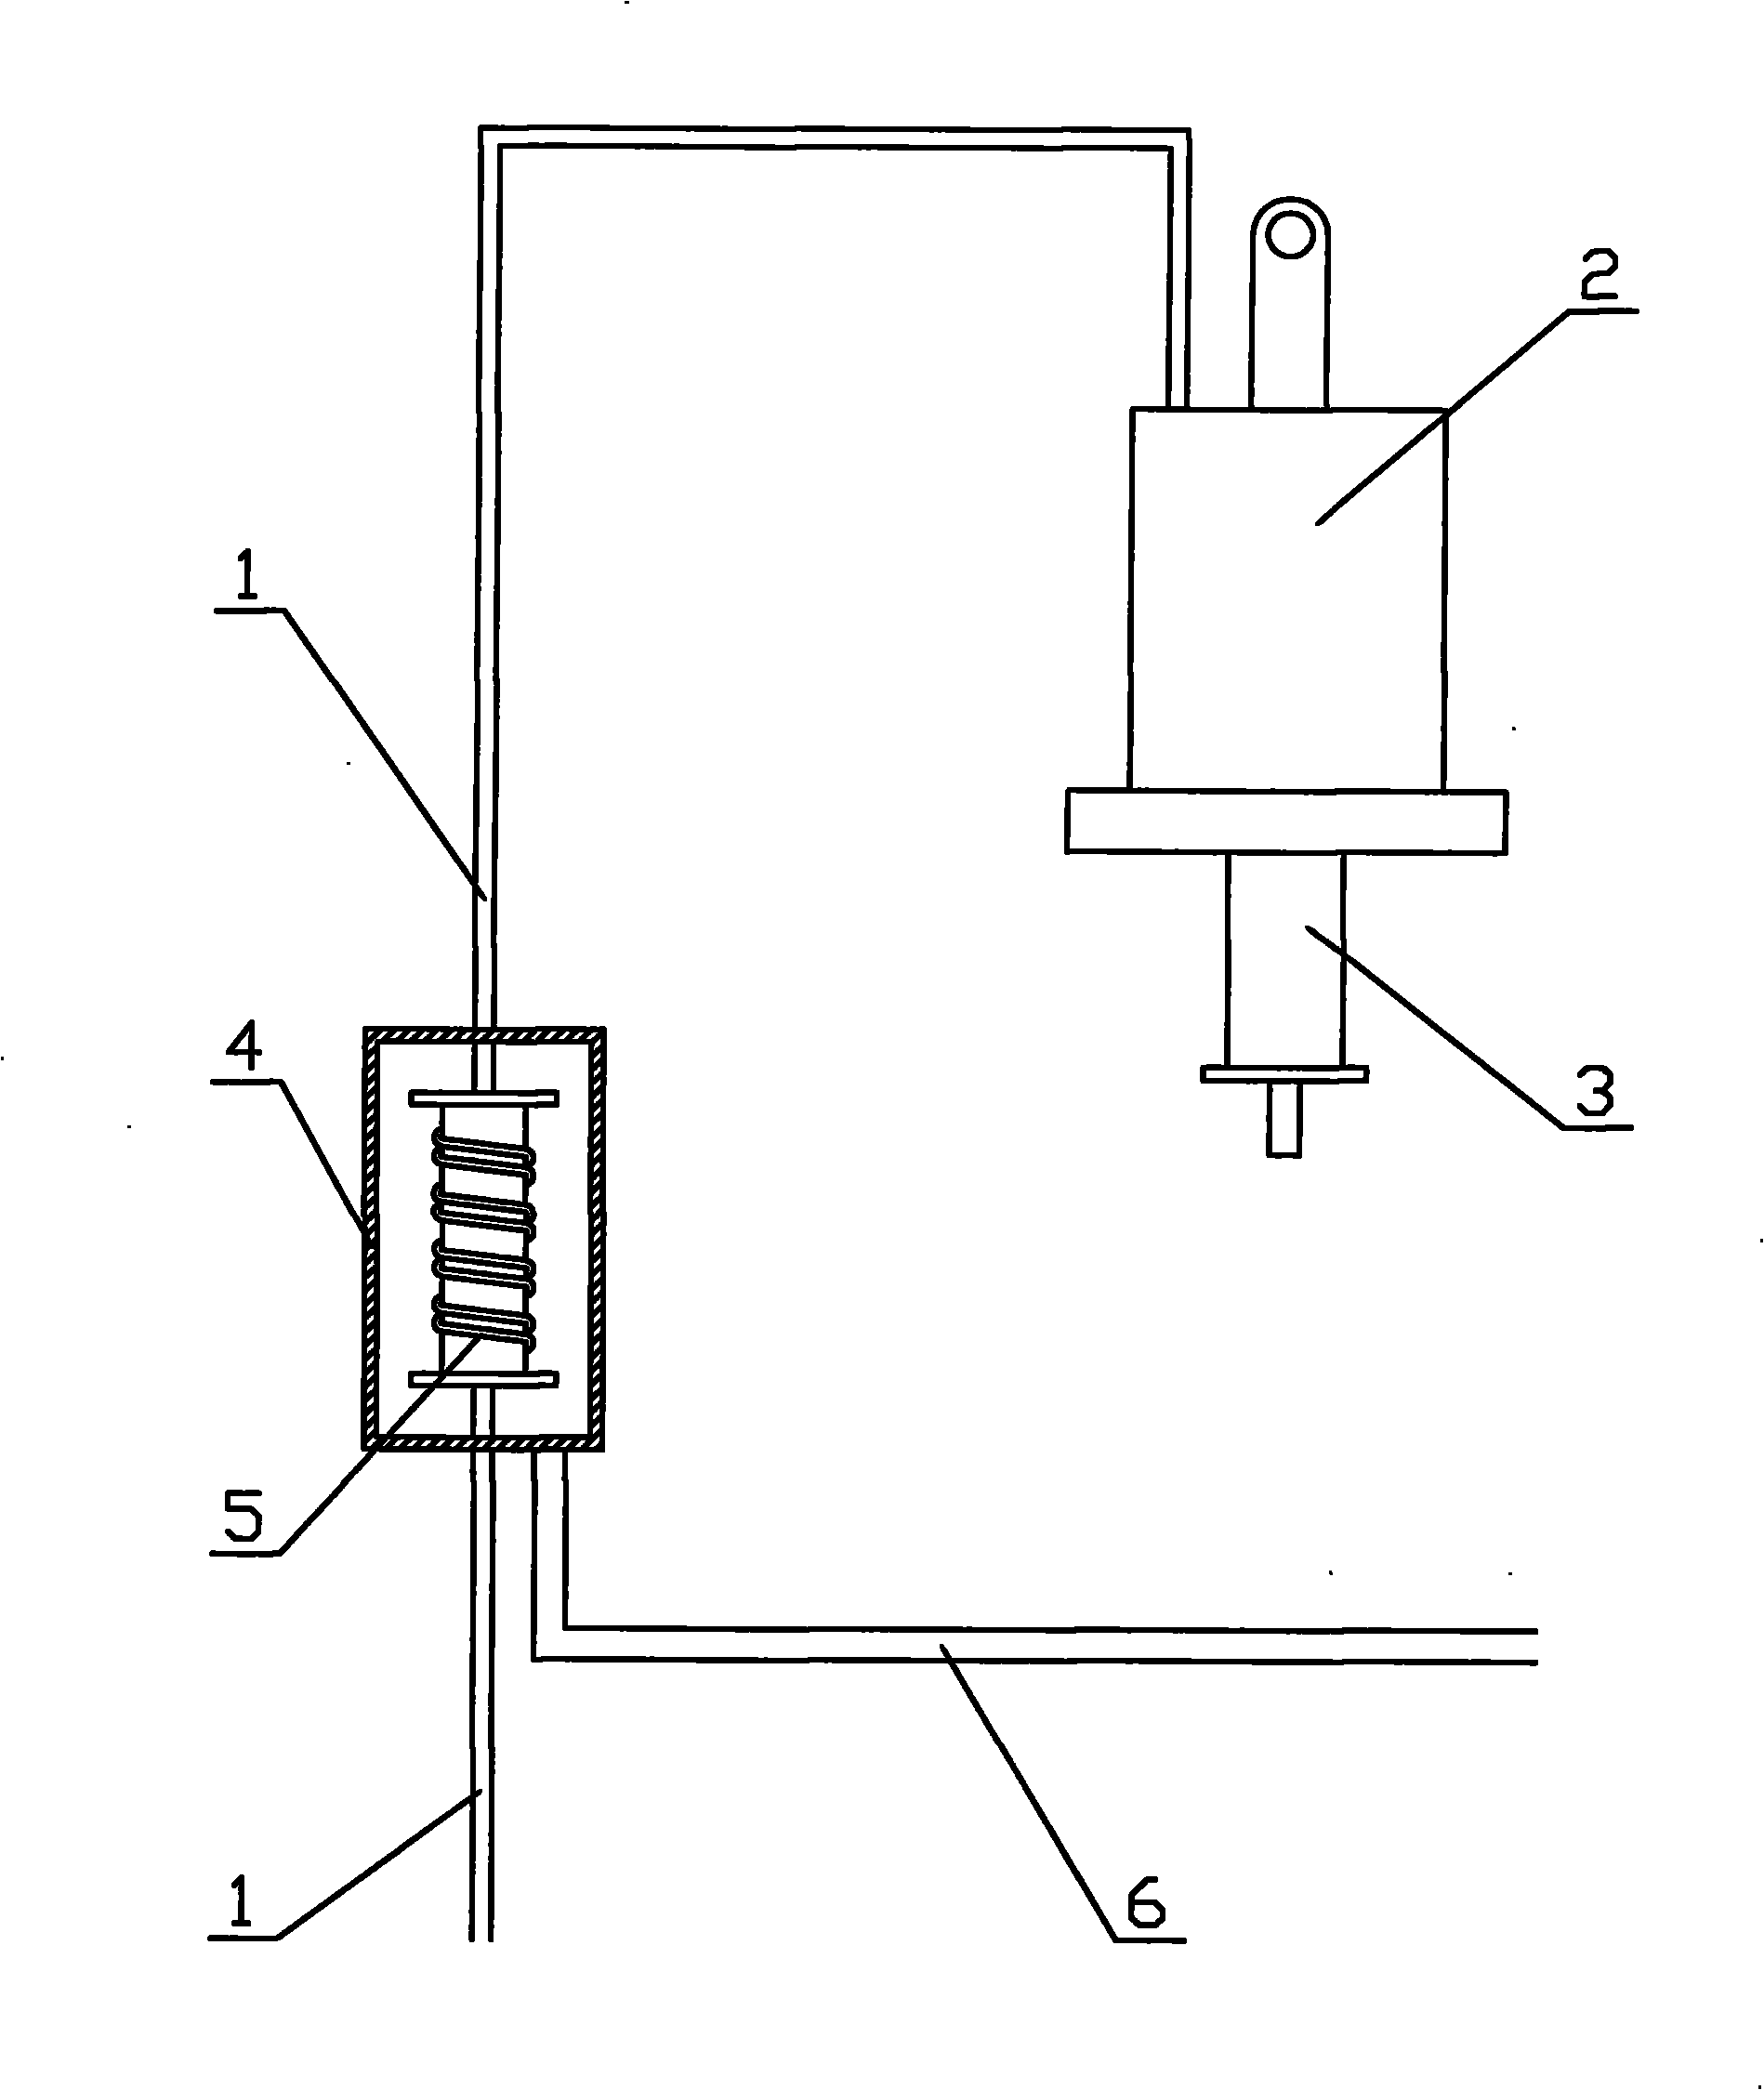 Transformer temperature controller with external heating elements